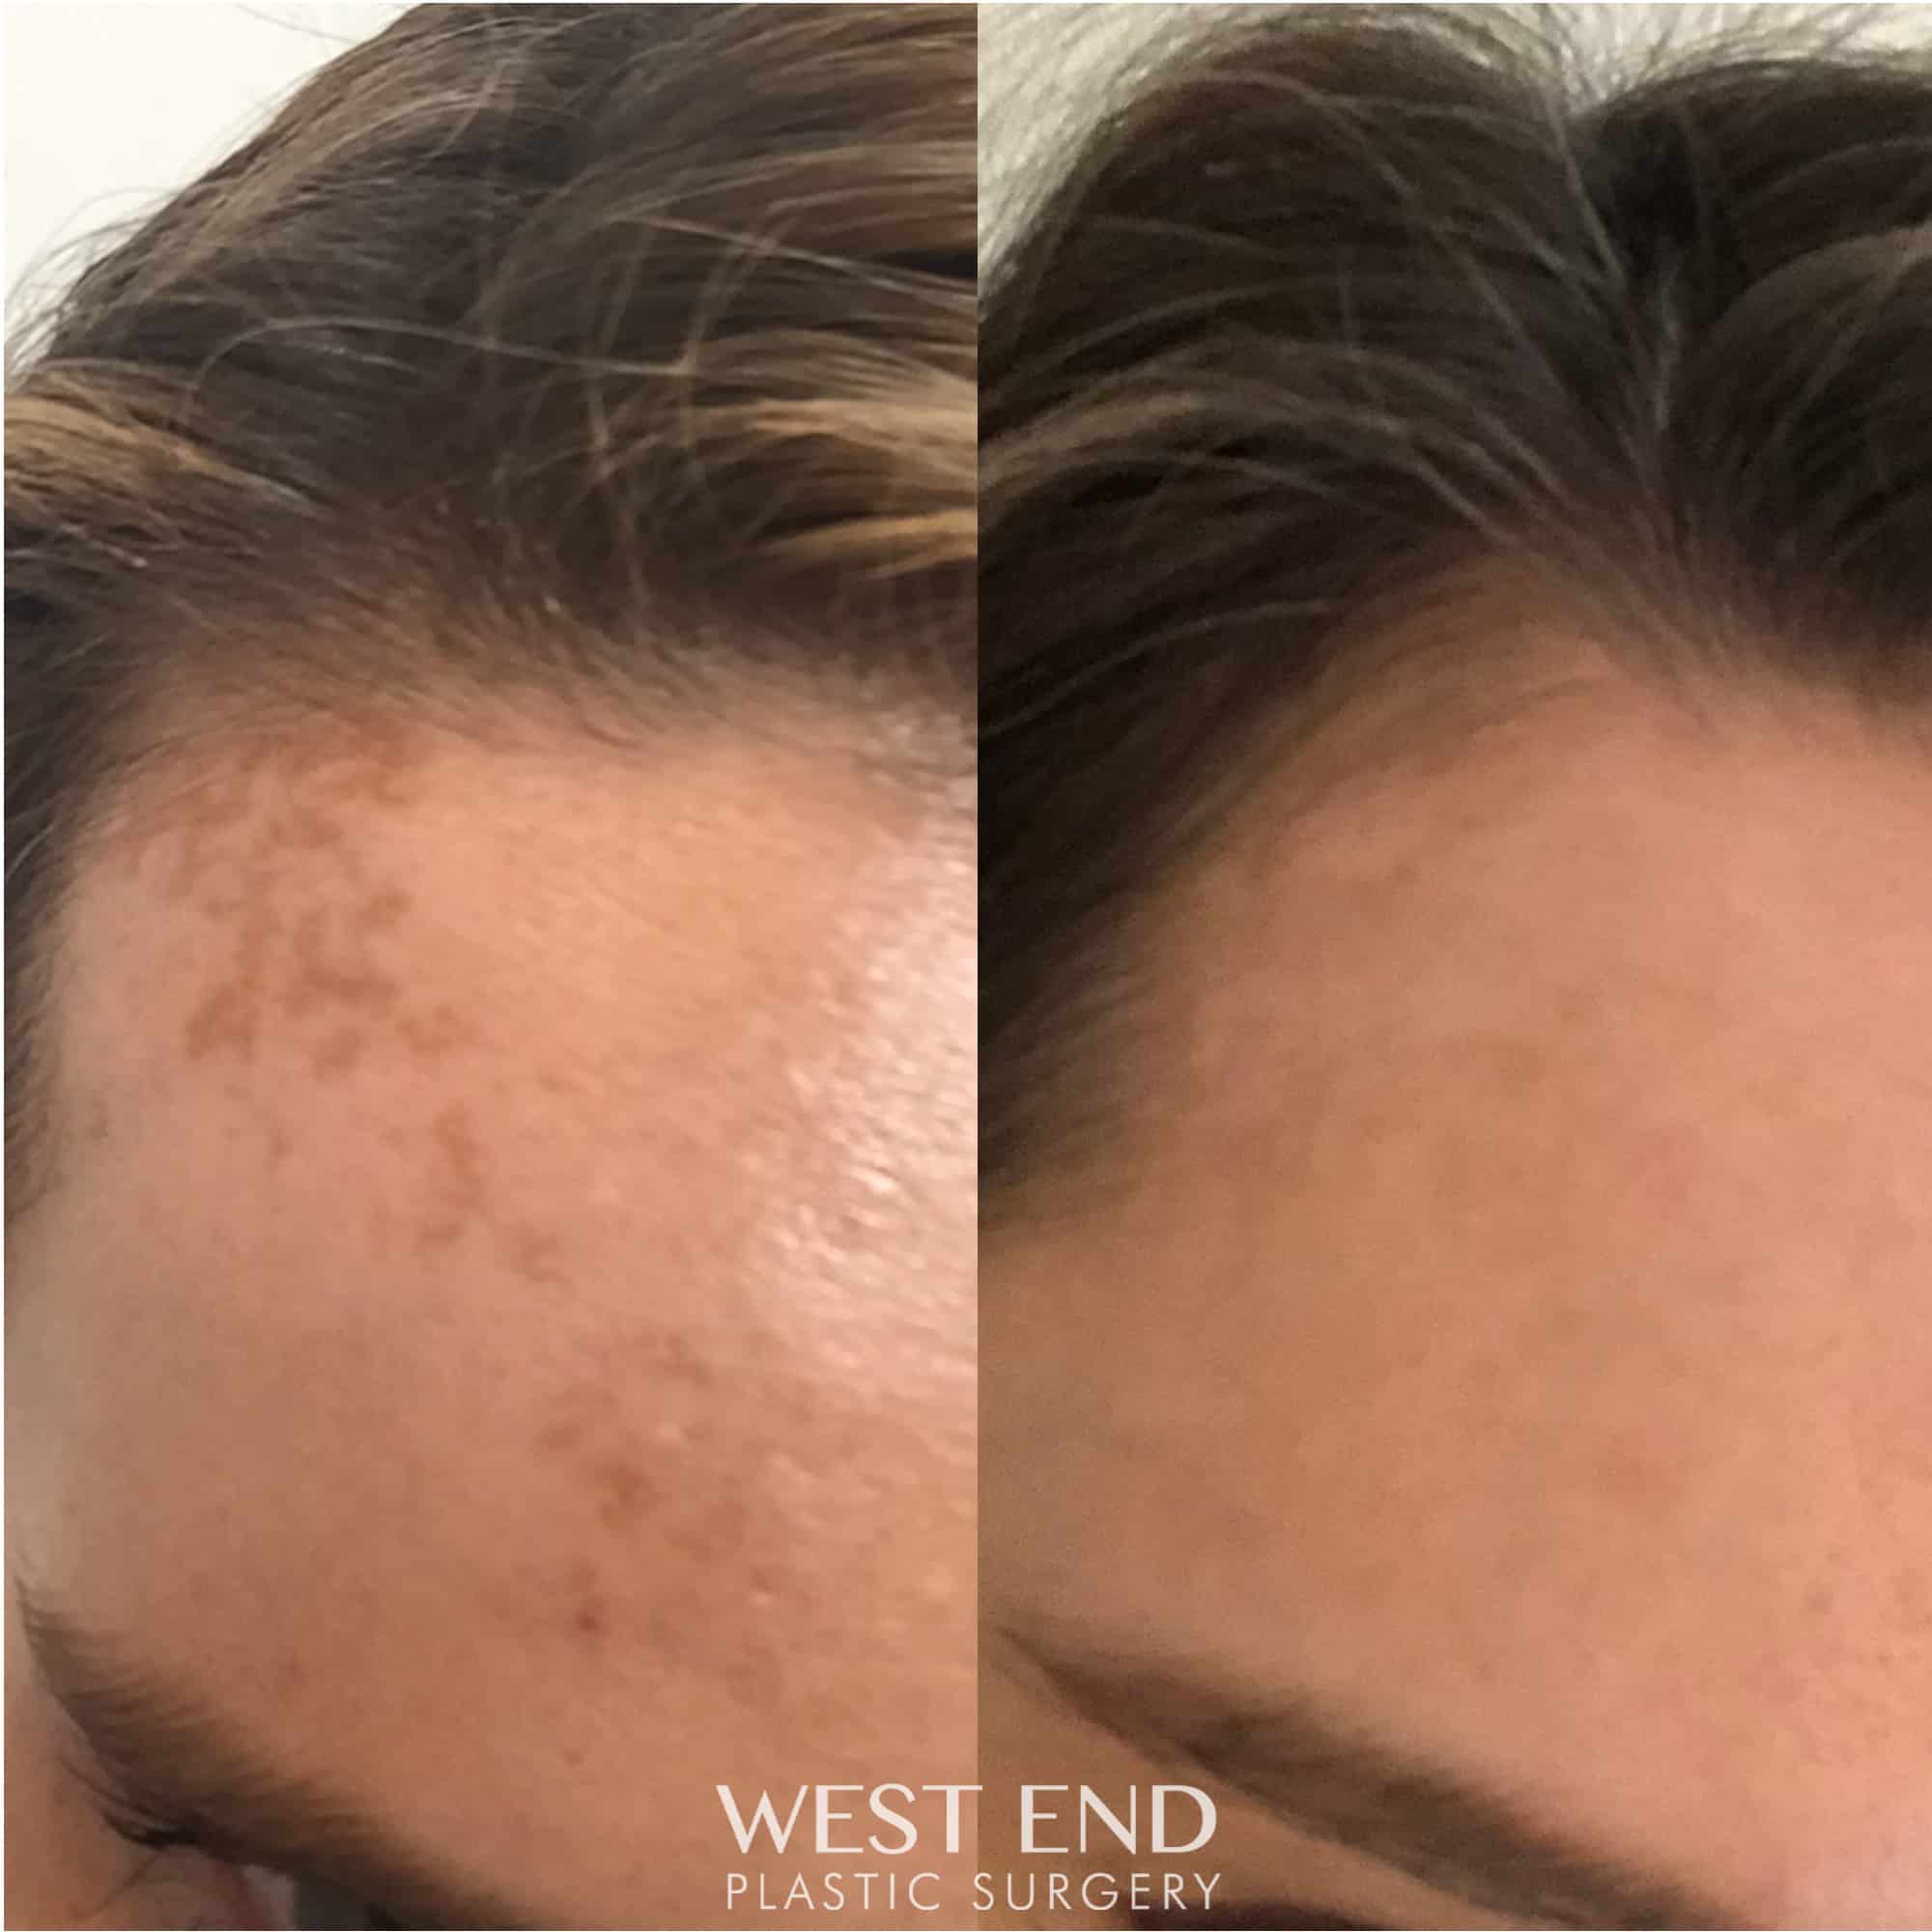 Melasma Treatment with Tetra CO2 CoolPeel and Medical Grade Skincare